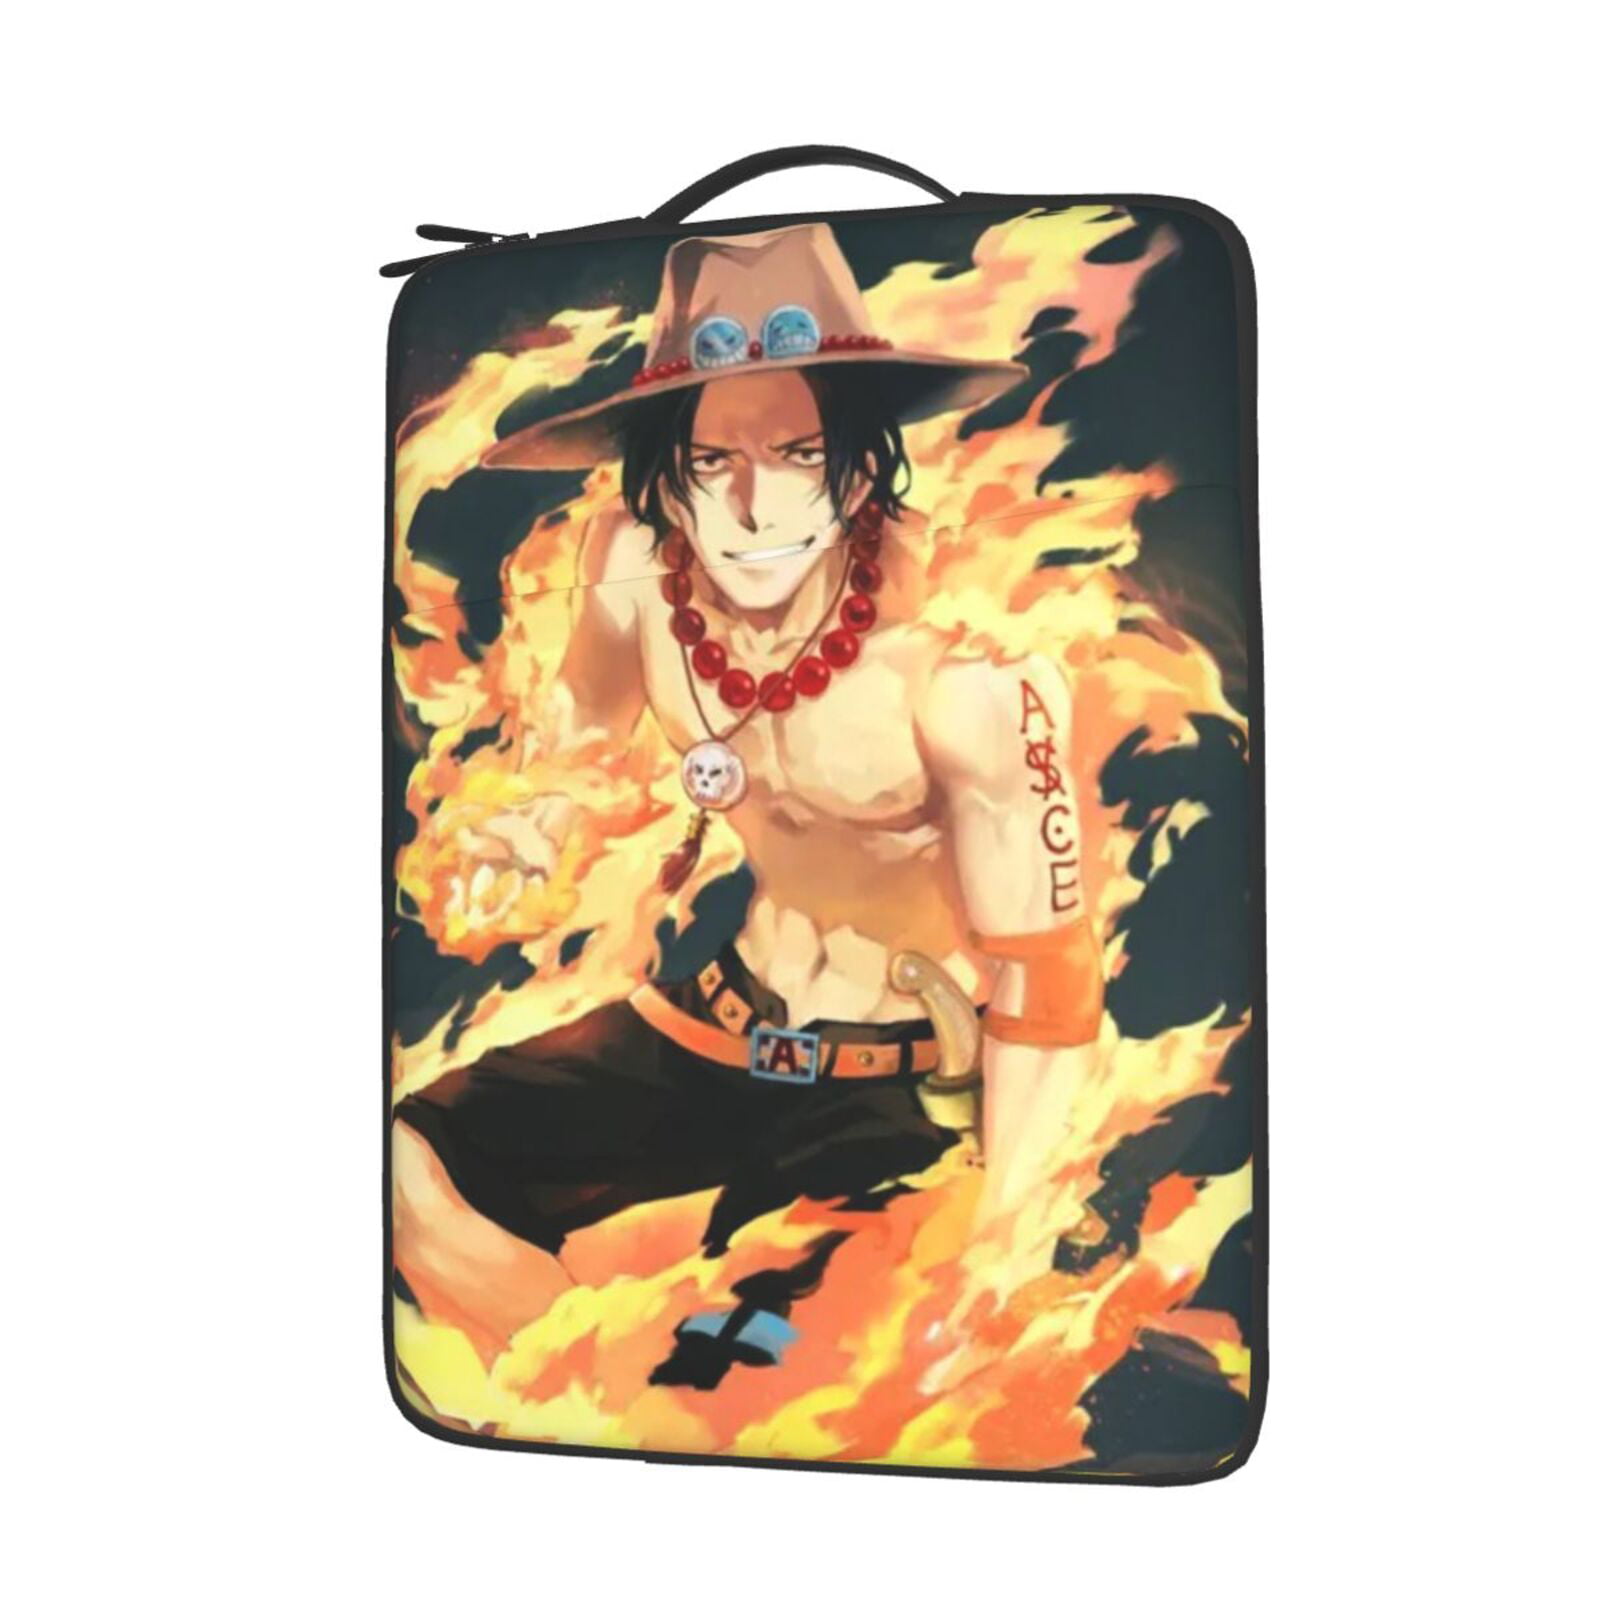 Waterproof Notebook Computer Bag-Light and Comfortable Tablet Briefcase-Band Zipper Portable Handbag Anime Game One Piece 13-Inch to 15-Inch Laptop Sleeve Case 